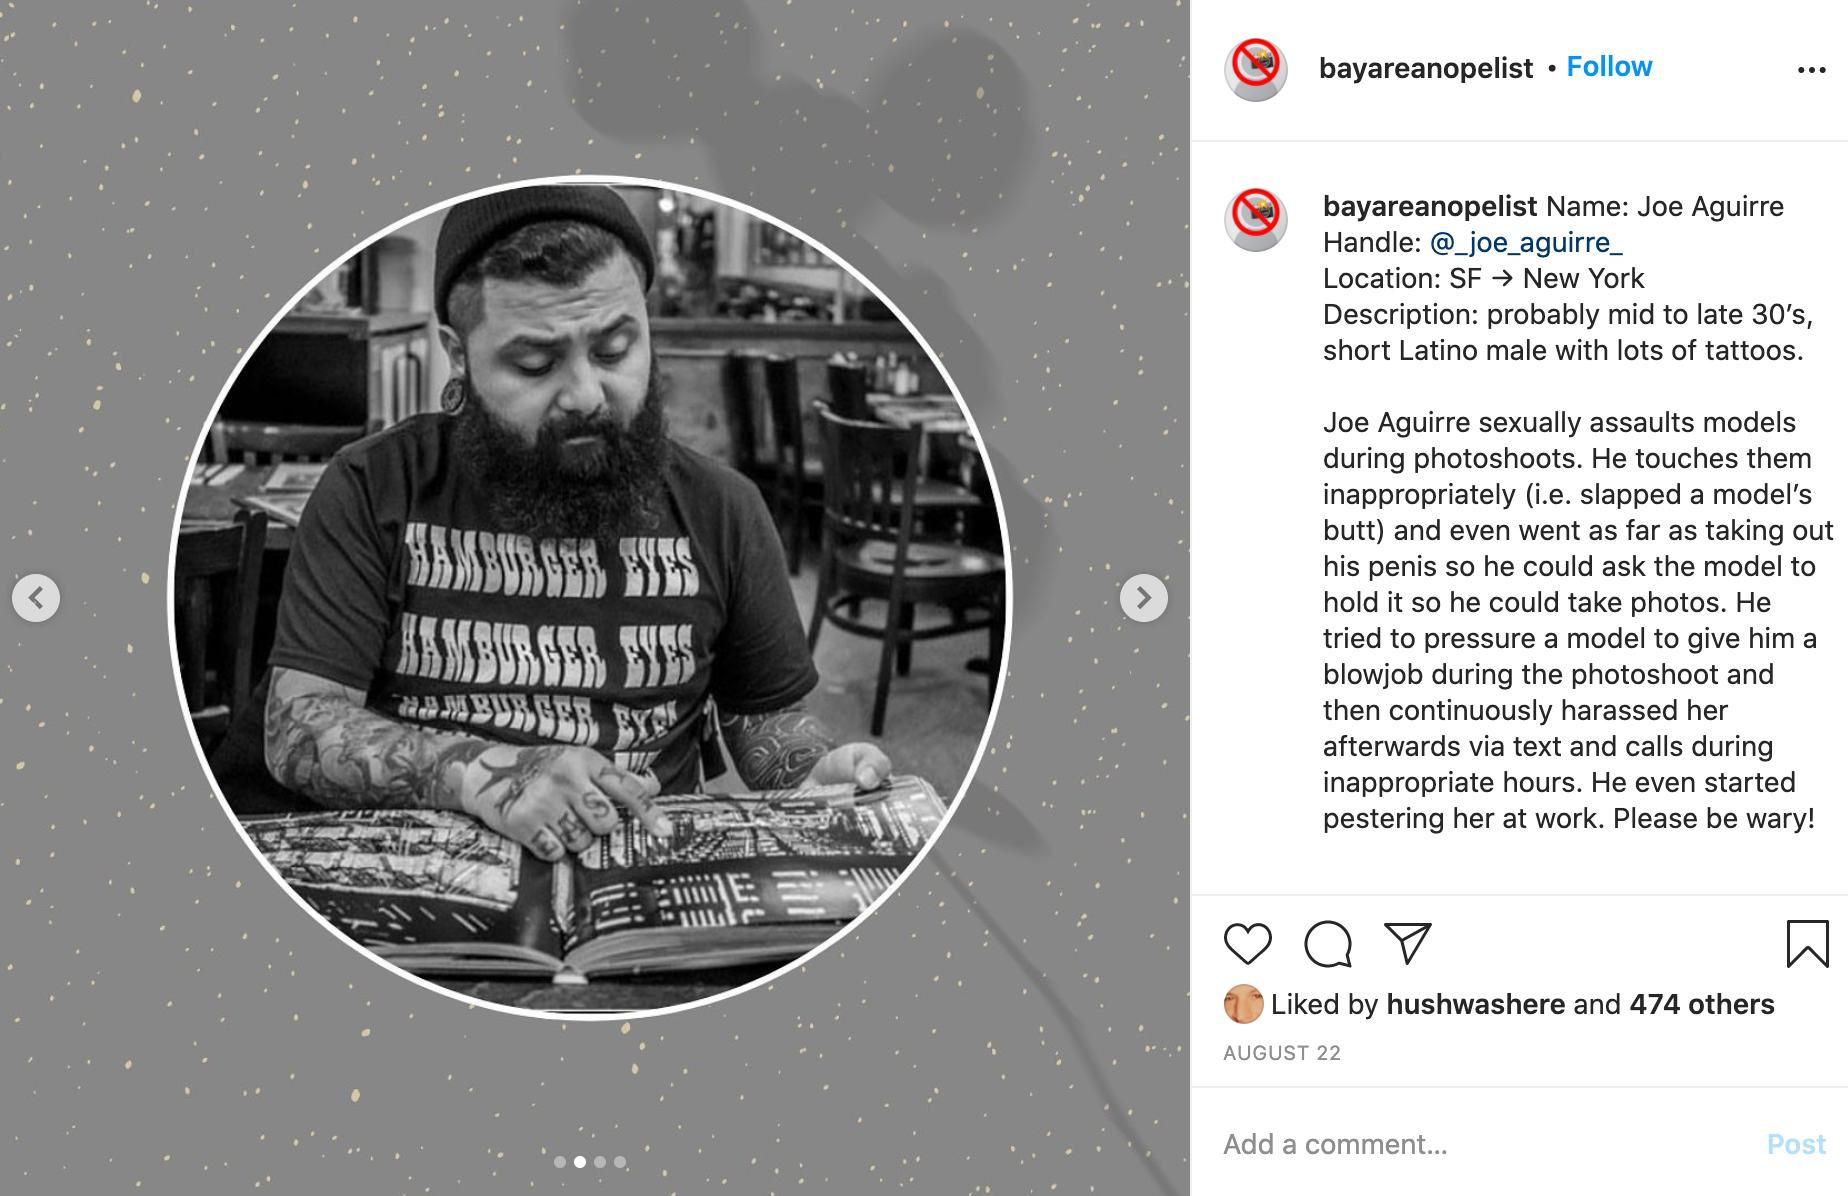 Street Photographer Joe Aguirre Is Now on a Sexual Misconduct List